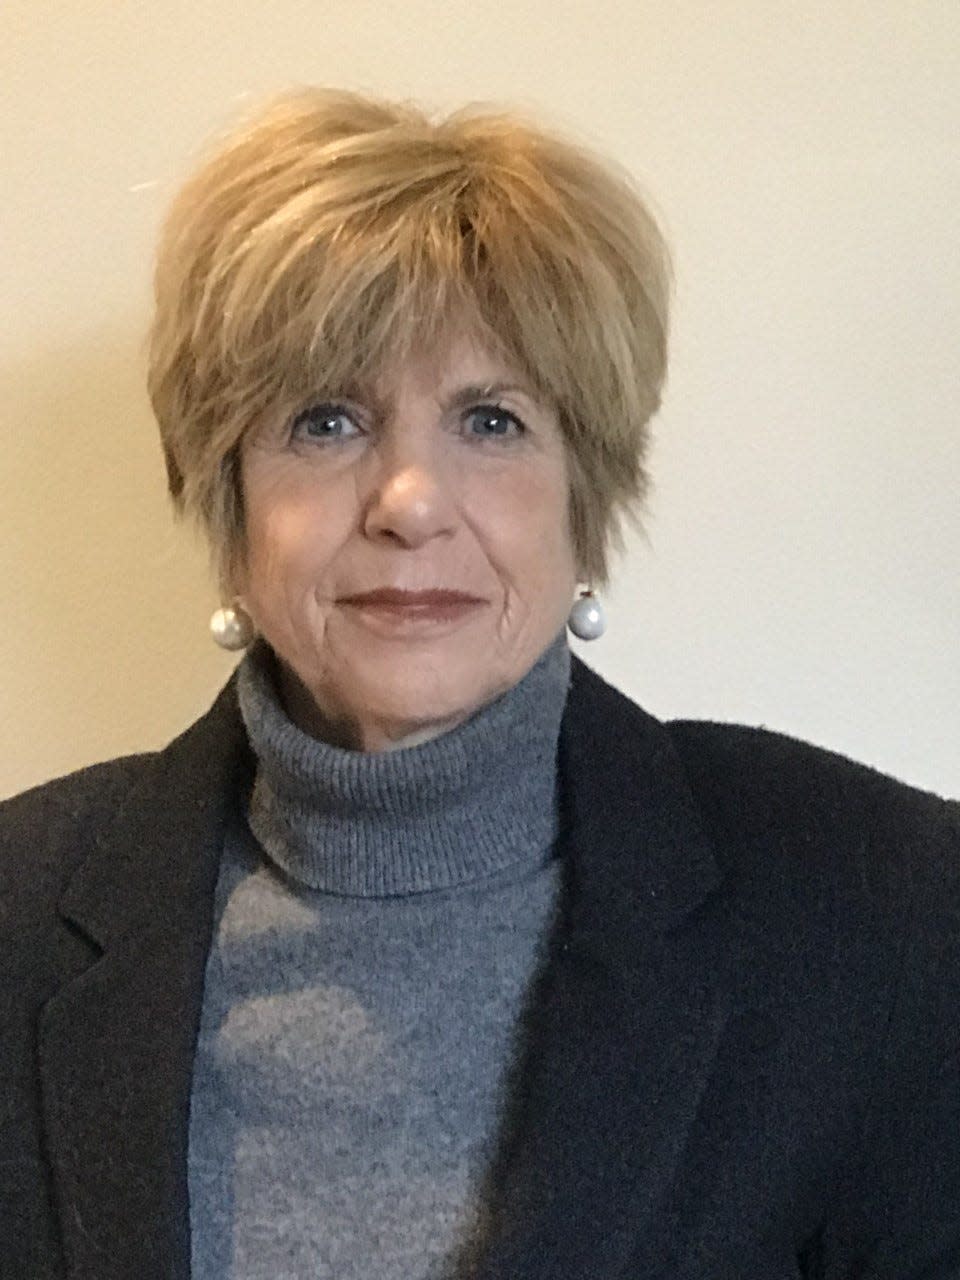 Trustee Liz Levins is running for Bayside Village President against the incumbent on April 4, 2023.